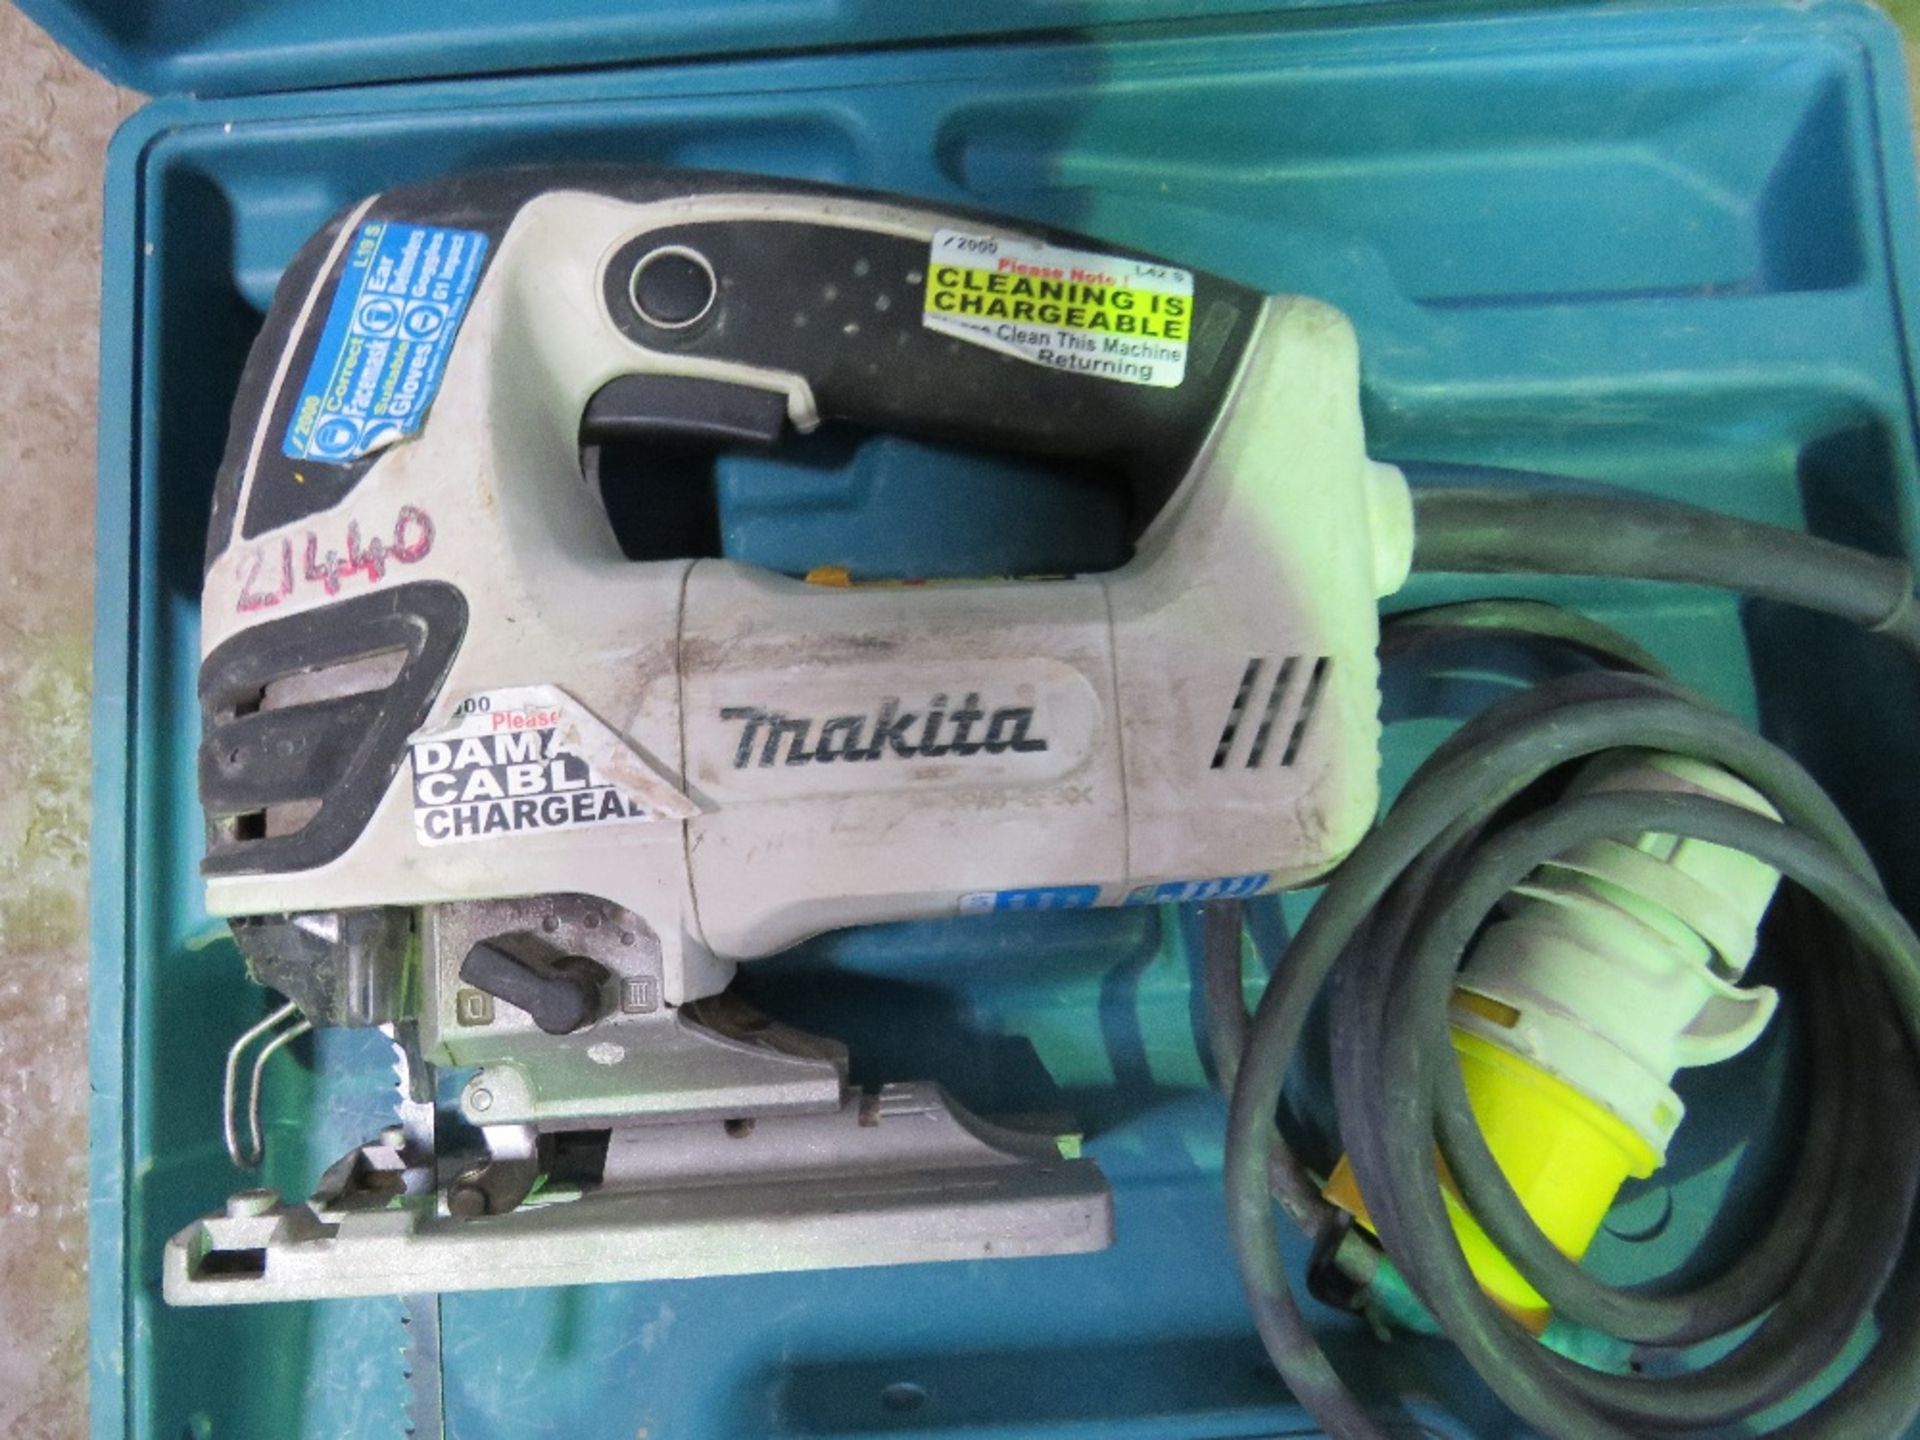 MAKITA 110VOLT JIGSAW IN BOX. UNTESTED, CONDITION UNKNOWN.